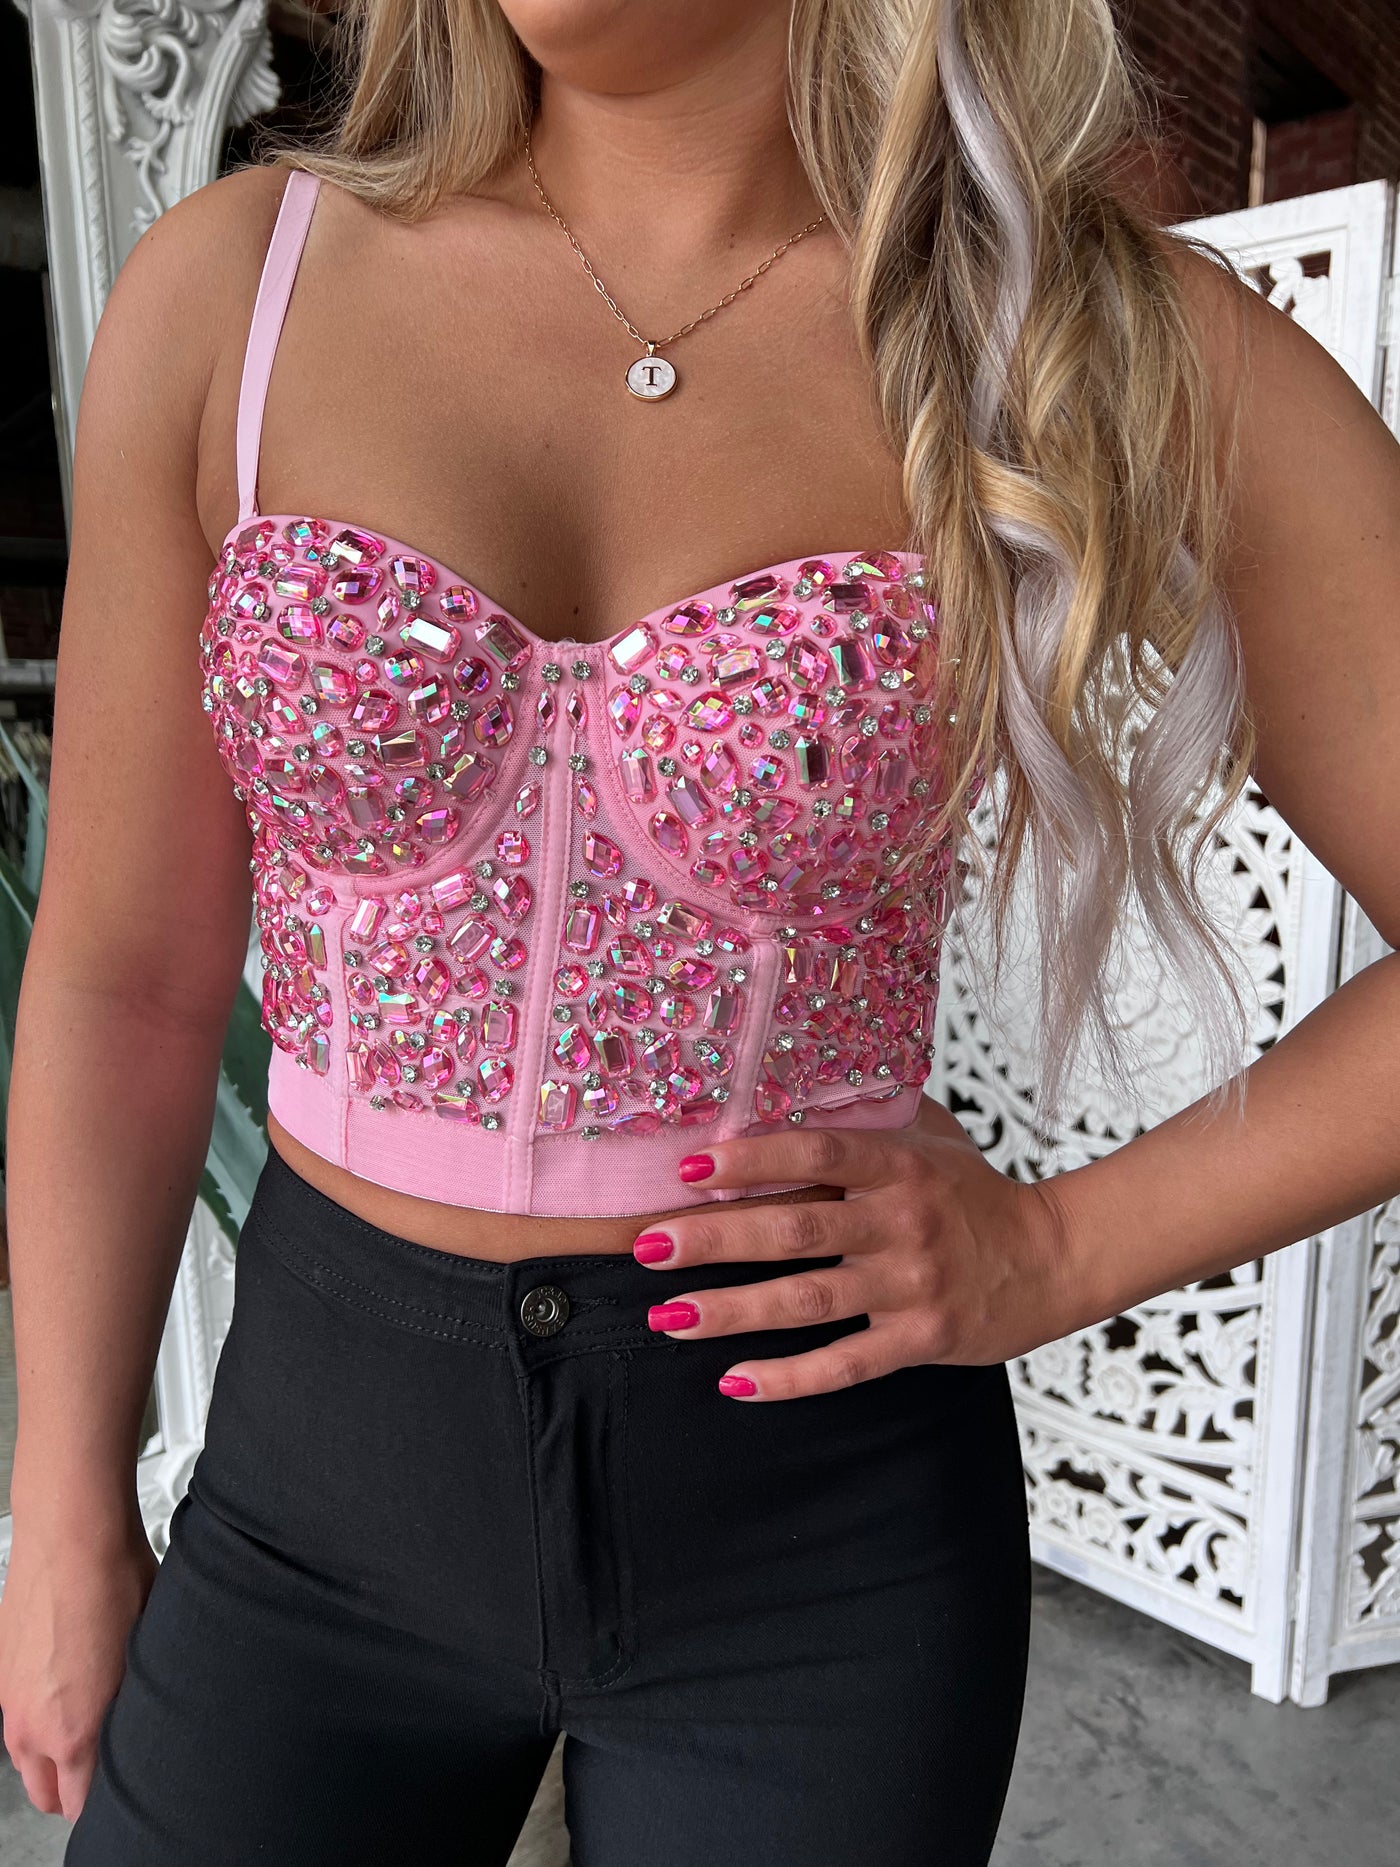 Whitney Rhinestone Bustier Top (Candy Pink) FINAL SALE